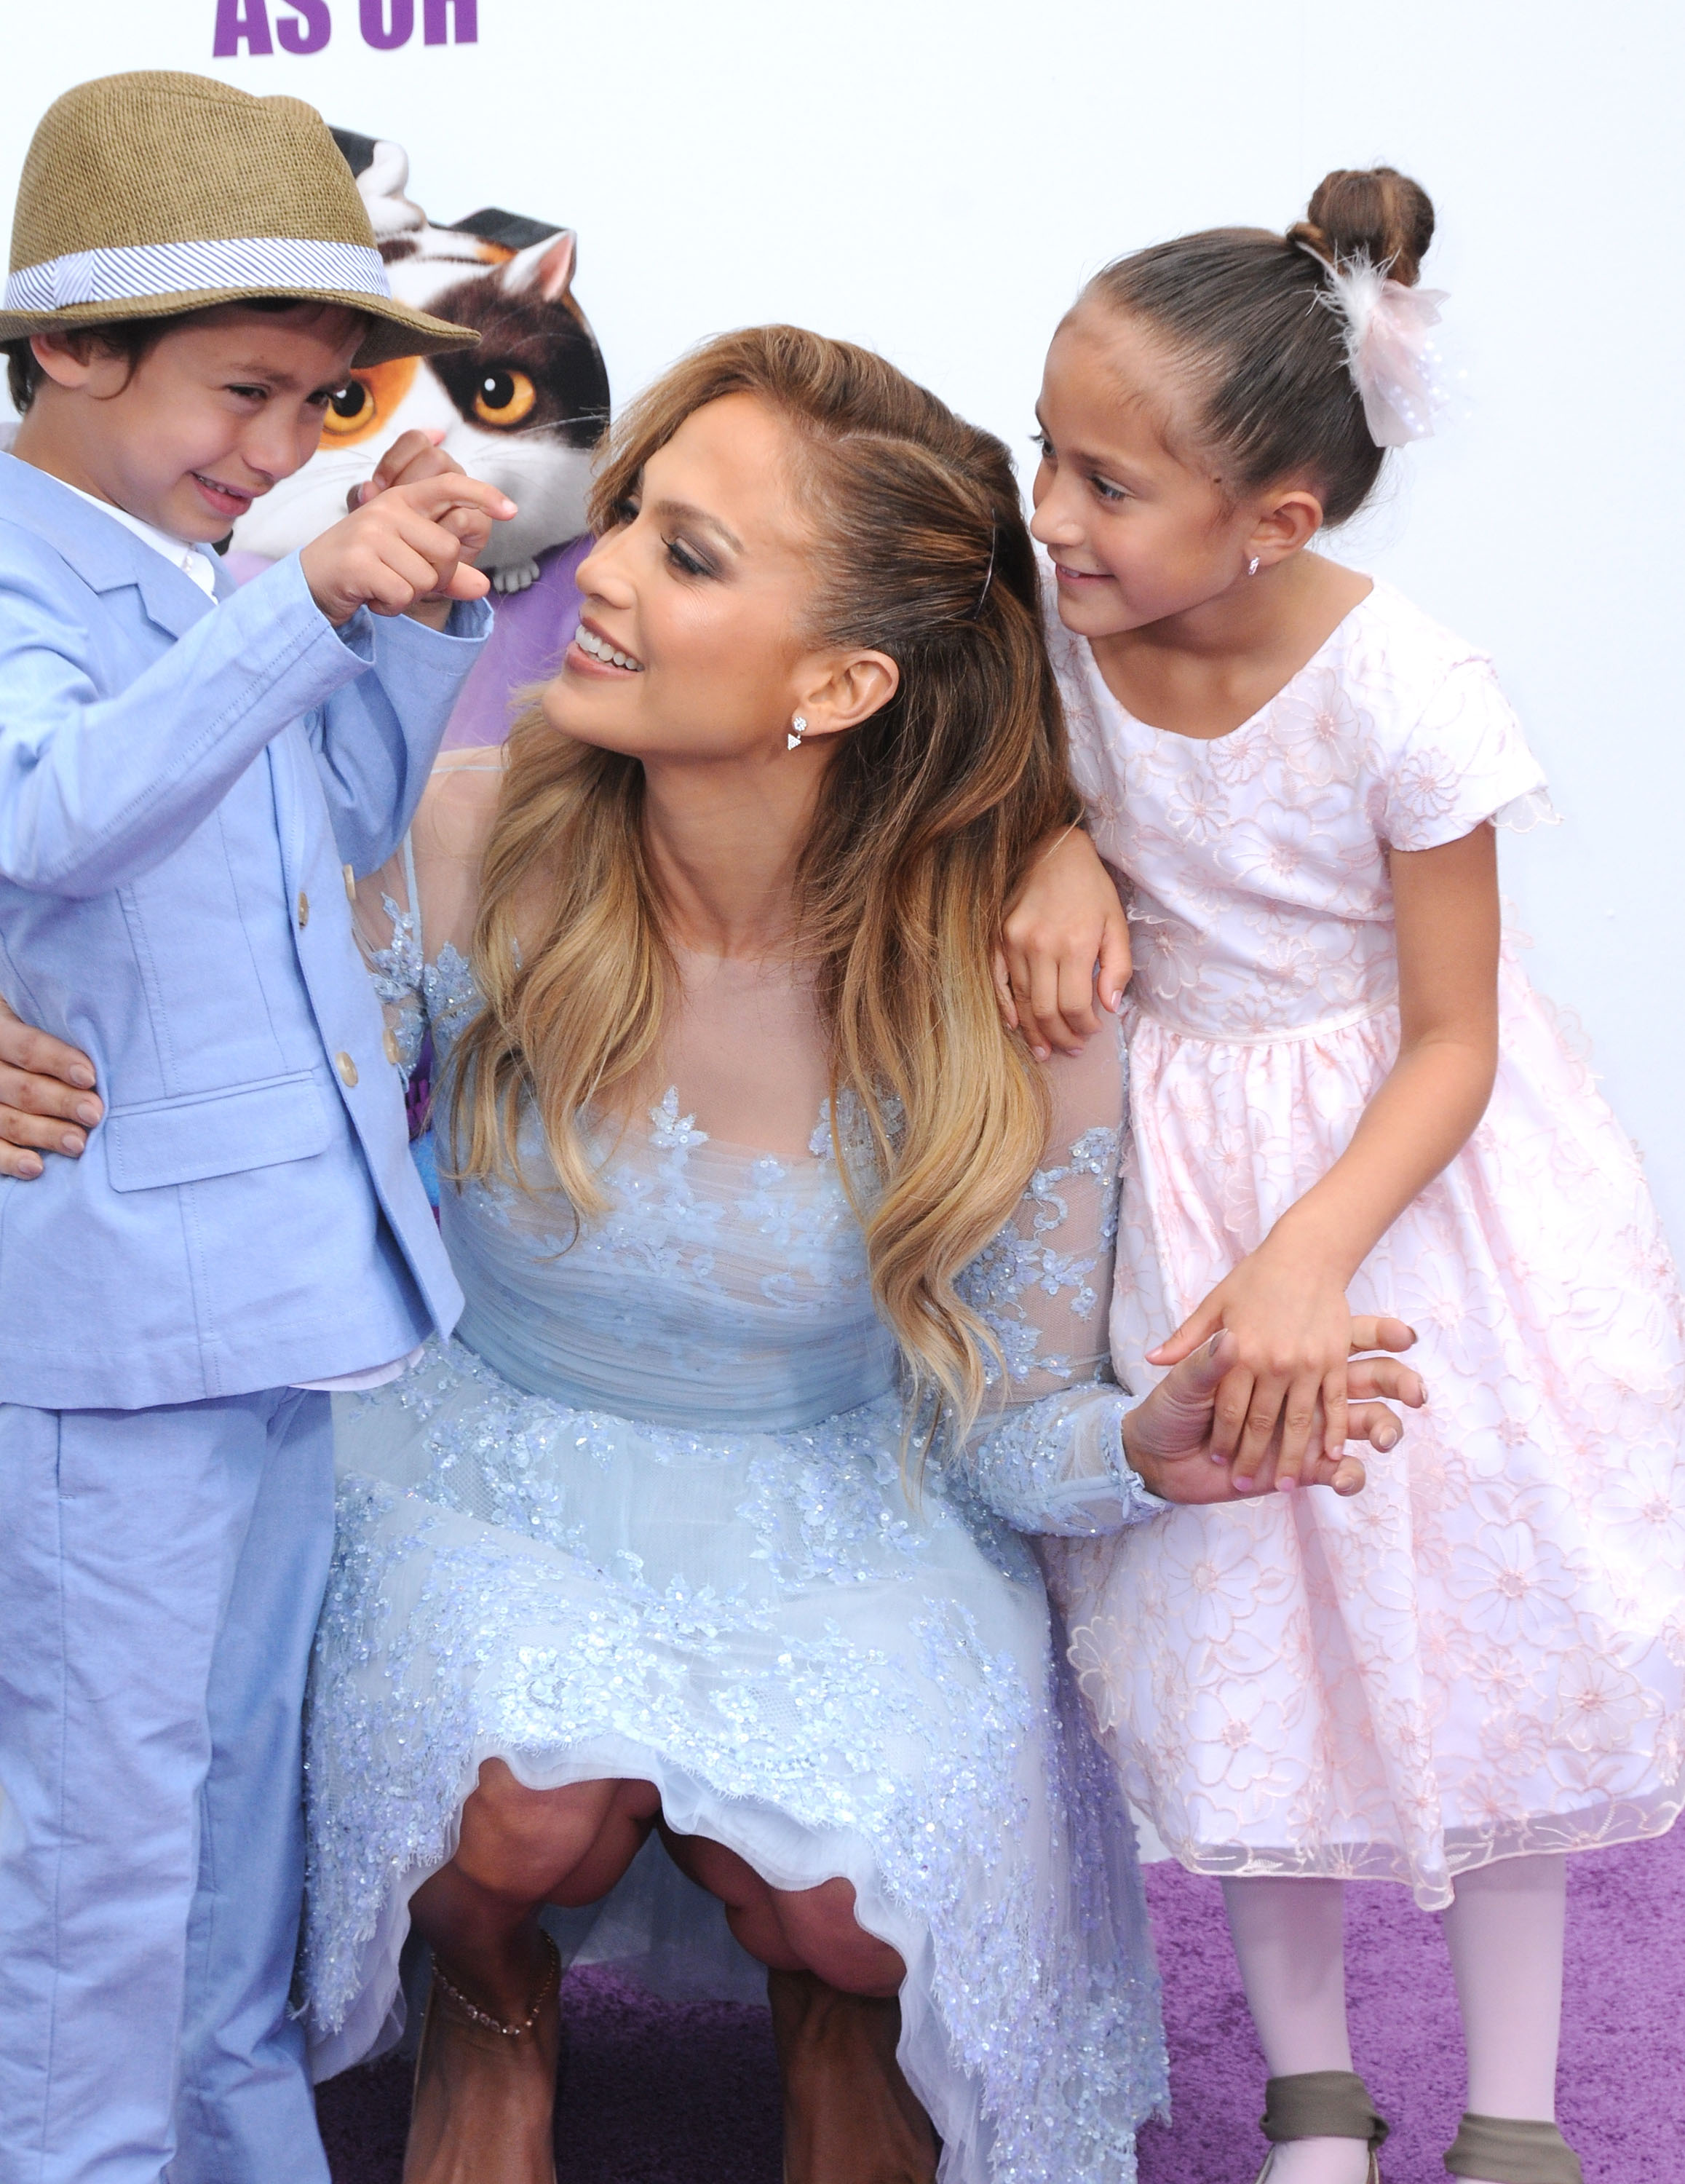 Max Muniz, Jennifer Lopez, and Emme Muniz at the premiere of "Home," 2015 | Source: Getty Images